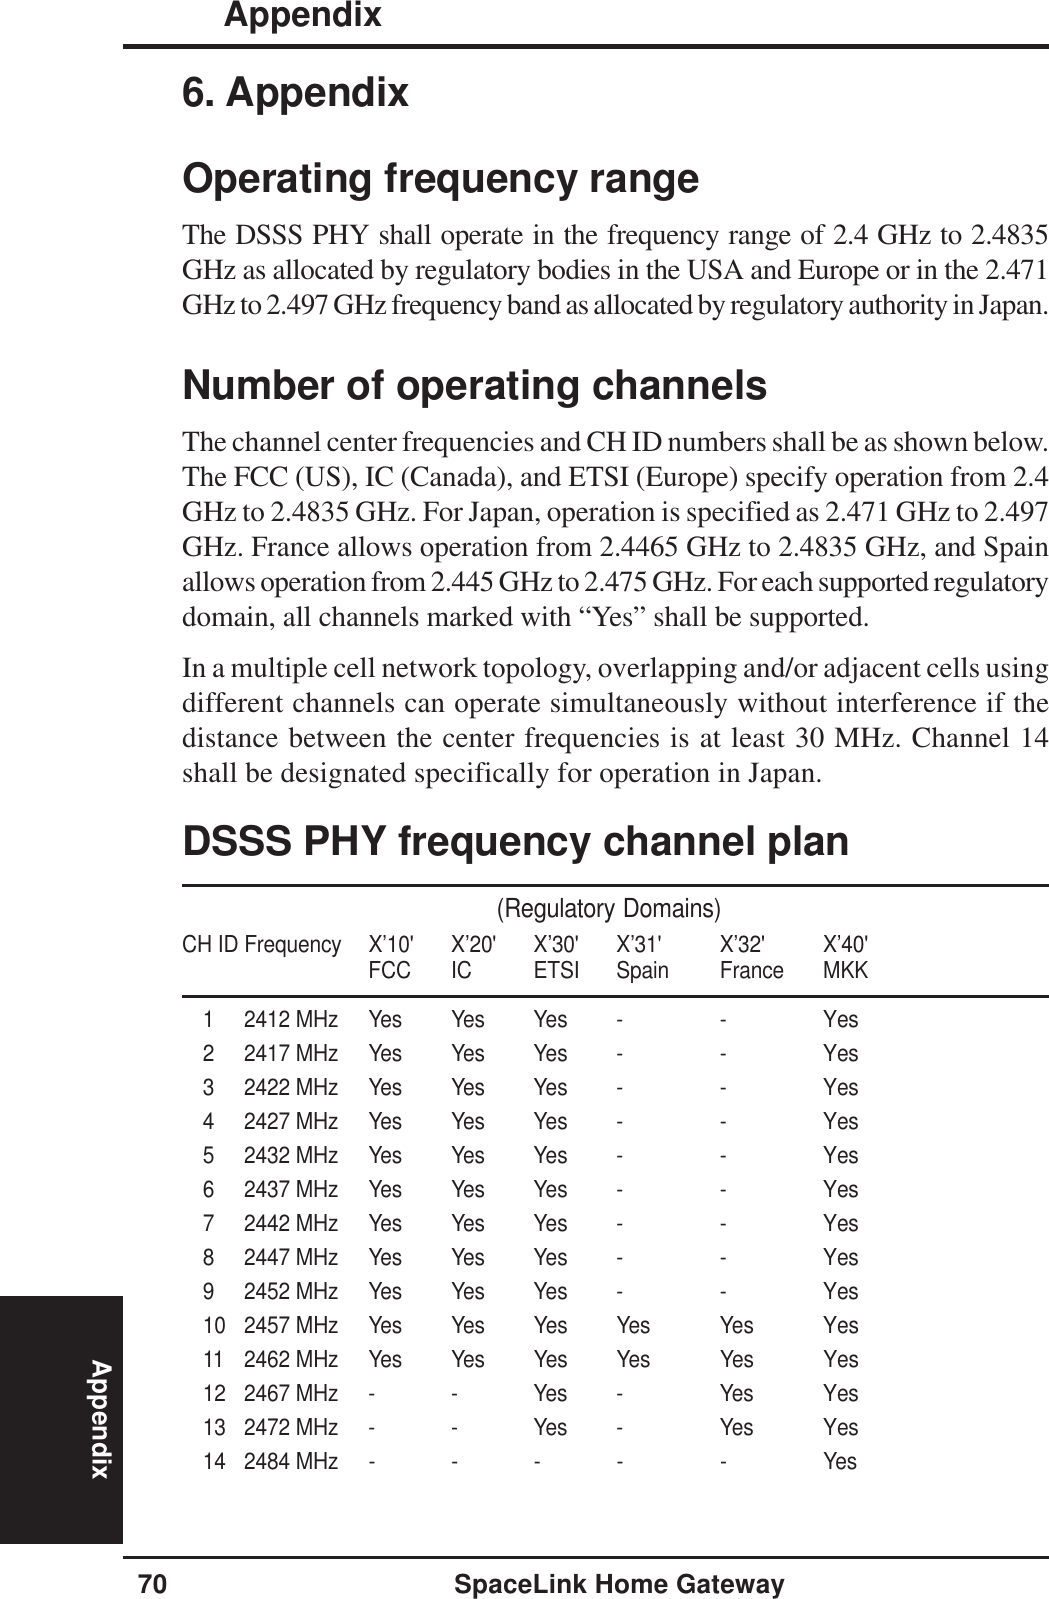 Appendix70 SpaceLink Home GatewayAppendix6. AppendixOperating frequency rangeThe DSSS PHY shall operate in the frequency range of 2.4 GHz to 2.4835GHz as allocated by regulatory bodies in the USA and Europe or in the 2.471GHz to 2.497 GHz frequency band as allocated by regulatory authority in Japan.Number of operating channelsThe channel center frequencies and CH ID numbers shall be as shown below.The FCC (US), IC (Canada), and ETSI (Europe) specify operation from 2.4GHz to 2.4835 GHz. For Japan, operation is specified as 2.471 GHz to 2.497GHz. France allows operation from 2.4465 GHz to 2.4835 GHz, and Spainallows operation from 2.445 GHz to 2.475 GHz. For each supported regulatorydomain, all channels marked with “Yes” shall be supported.In a multiple cell network topology, overlapping and/or adjacent cells usingdifferent channels can operate simultaneously without interference if thedistance between the center frequencies is at least 30 MHz. Channel 14shall be designated specifically for operation in Japan.DSSS PHY frequency channel plan(Regulatory Domains)CH ID Frequency X’10&apos; X’20&apos; X’30&apos; X’31&apos; X’32&apos; X’40&apos;FCC IC ETSI Spain France MKK1 2412 MHz Yes Yes Yes - - Yes2 2417 MHz Yes Yes Yes - - Yes3 2422 MHz Yes Yes Yes - - Yes4 2427 MHz Yes Yes Yes - - Yes5 2432 MHz Yes Yes Yes - - Yes6 2437 MHz Yes Yes Yes - - Yes7 2442 MHz Yes Yes Yes - - Yes8 2447 MHz Yes Yes Yes - - Yes9 2452 MHz Yes Yes Yes - - Yes10 2457 MHz Yes Yes Yes Yes Yes Yes11 2462 MHz Yes Yes Yes Yes Yes Yes12 2467 MHz - - Yes - Yes Yes13 2472 MHz - - Yes - Yes Yes14 2484 MHz - - - - - Yes